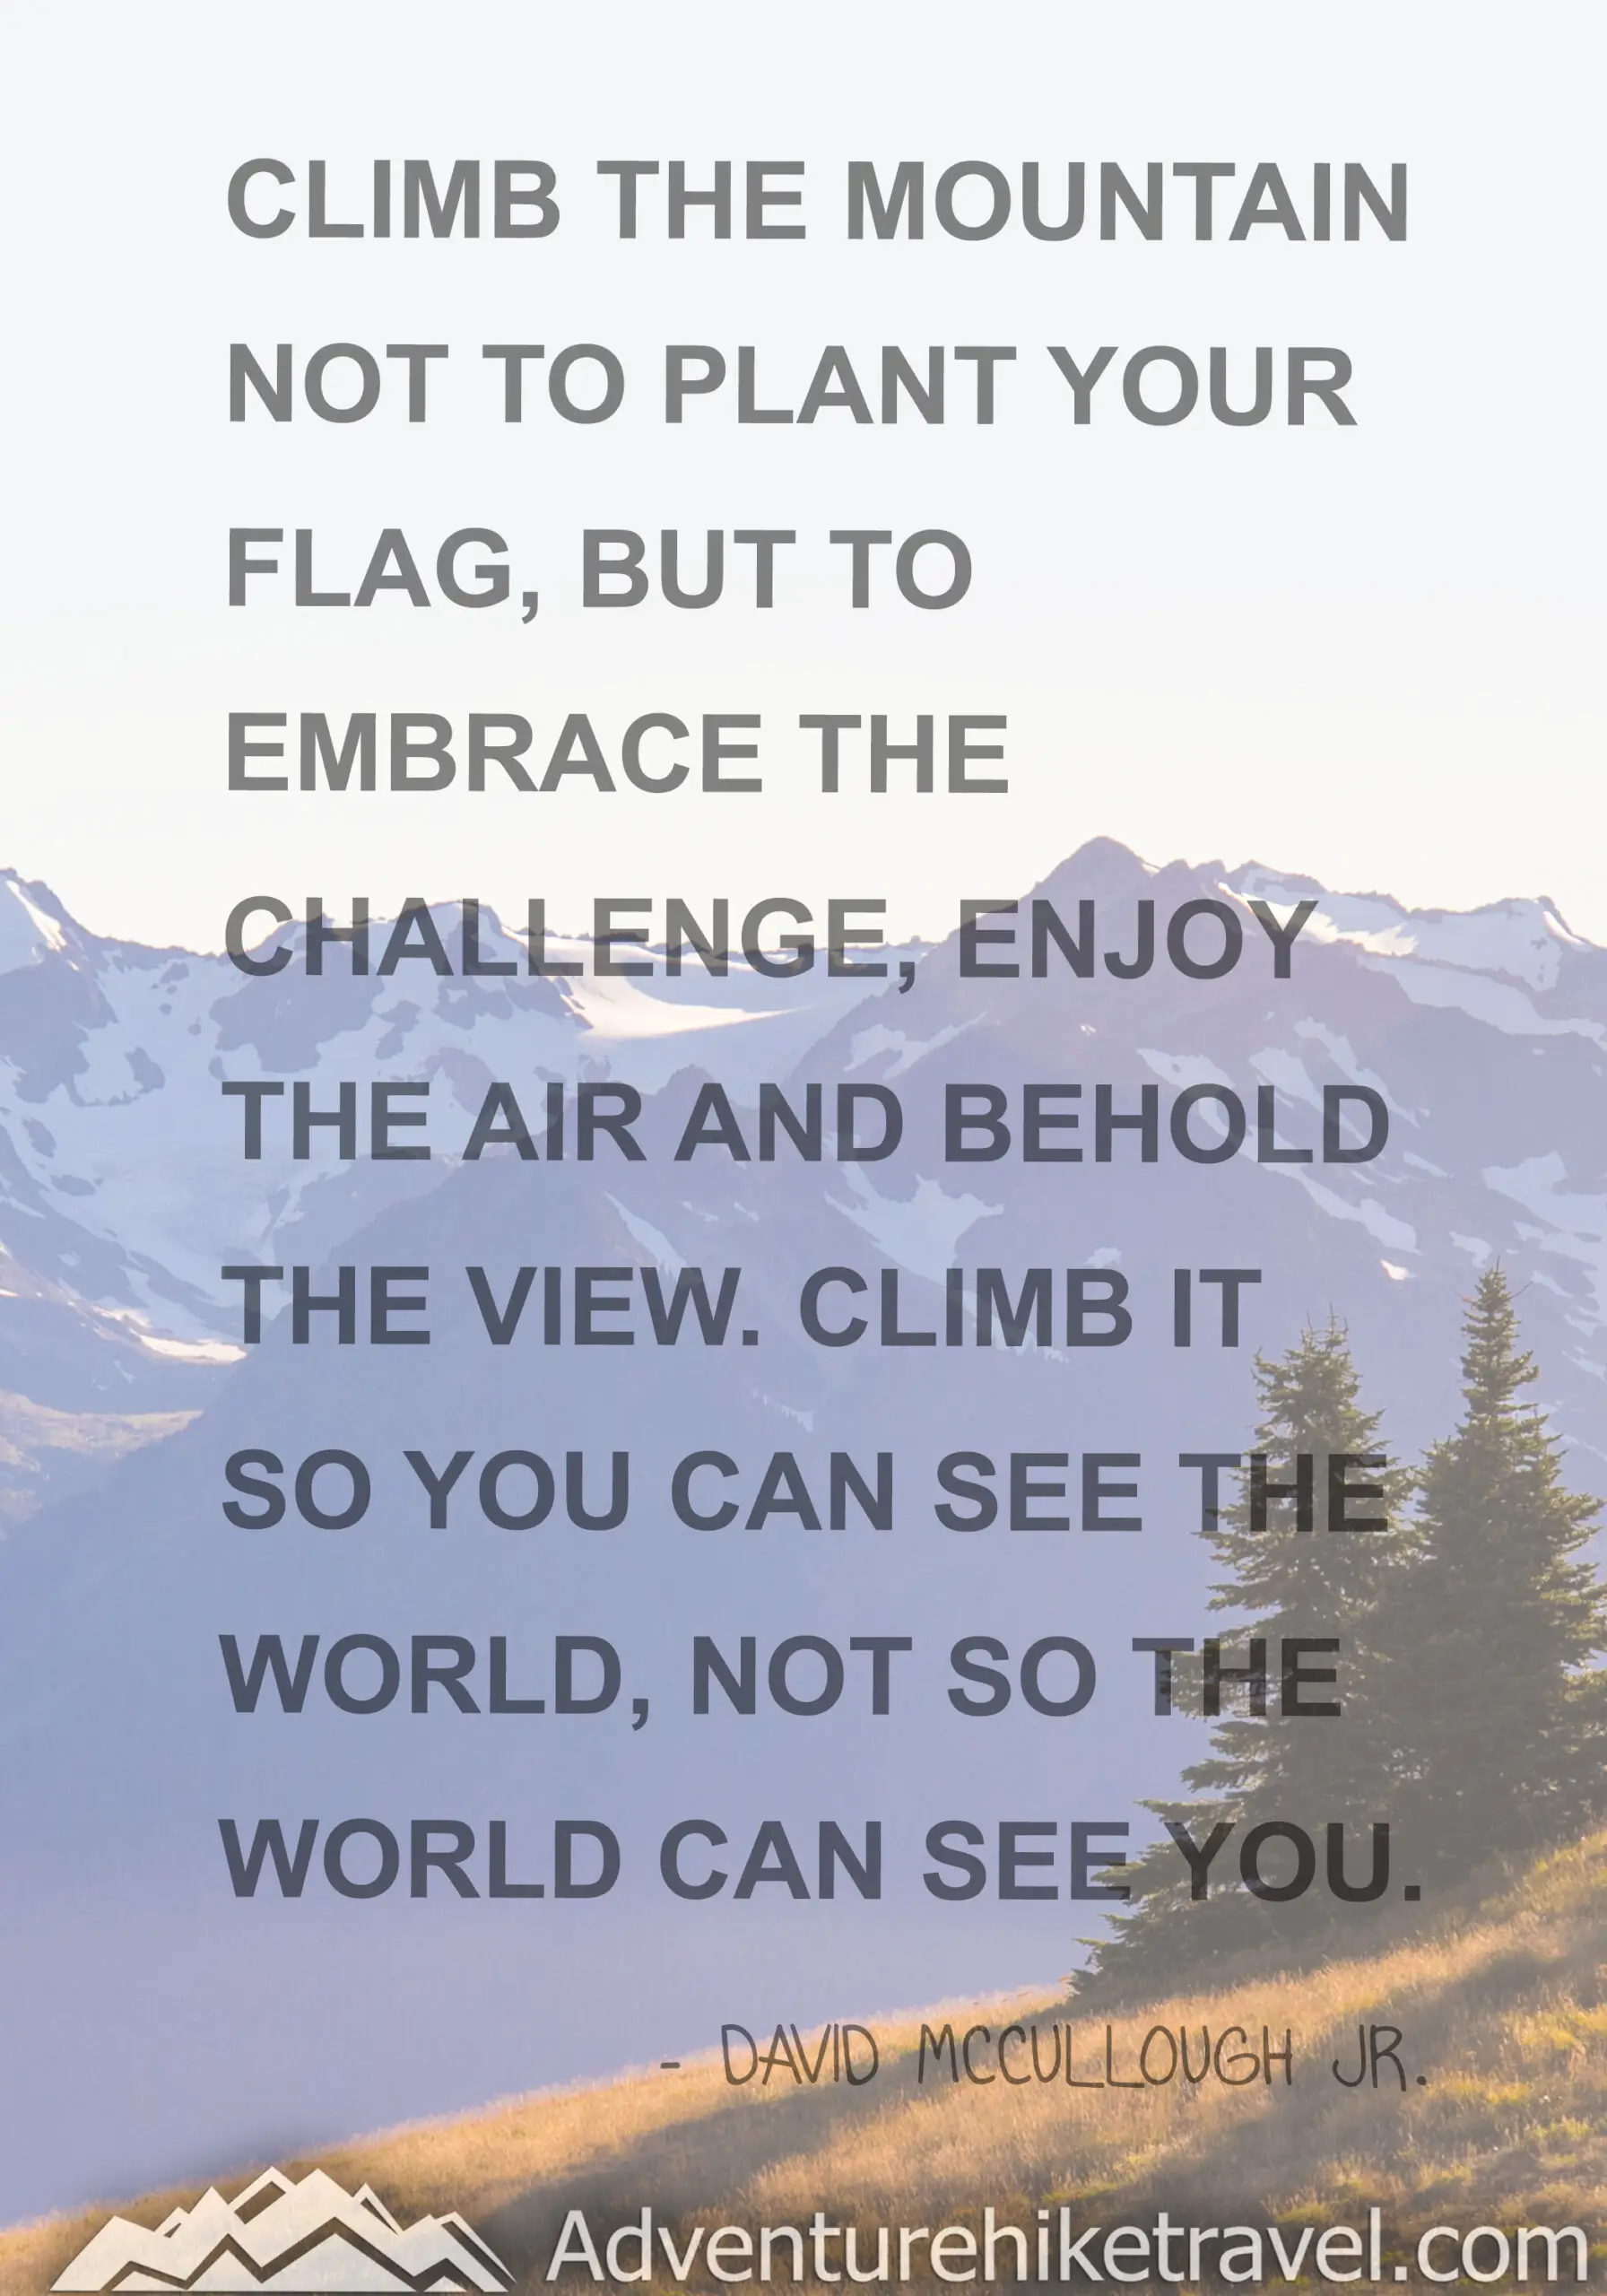 "Climb the mountain not to plant your flag, but to embrace the challenge, enjoy the air and behold the view. Climb it so you can see the world, not so the world can see you." -David Mccullough JR. #hiking #quotes #inspirationalquotes #hikingquotes #adventurequotes #outdoors #trekking